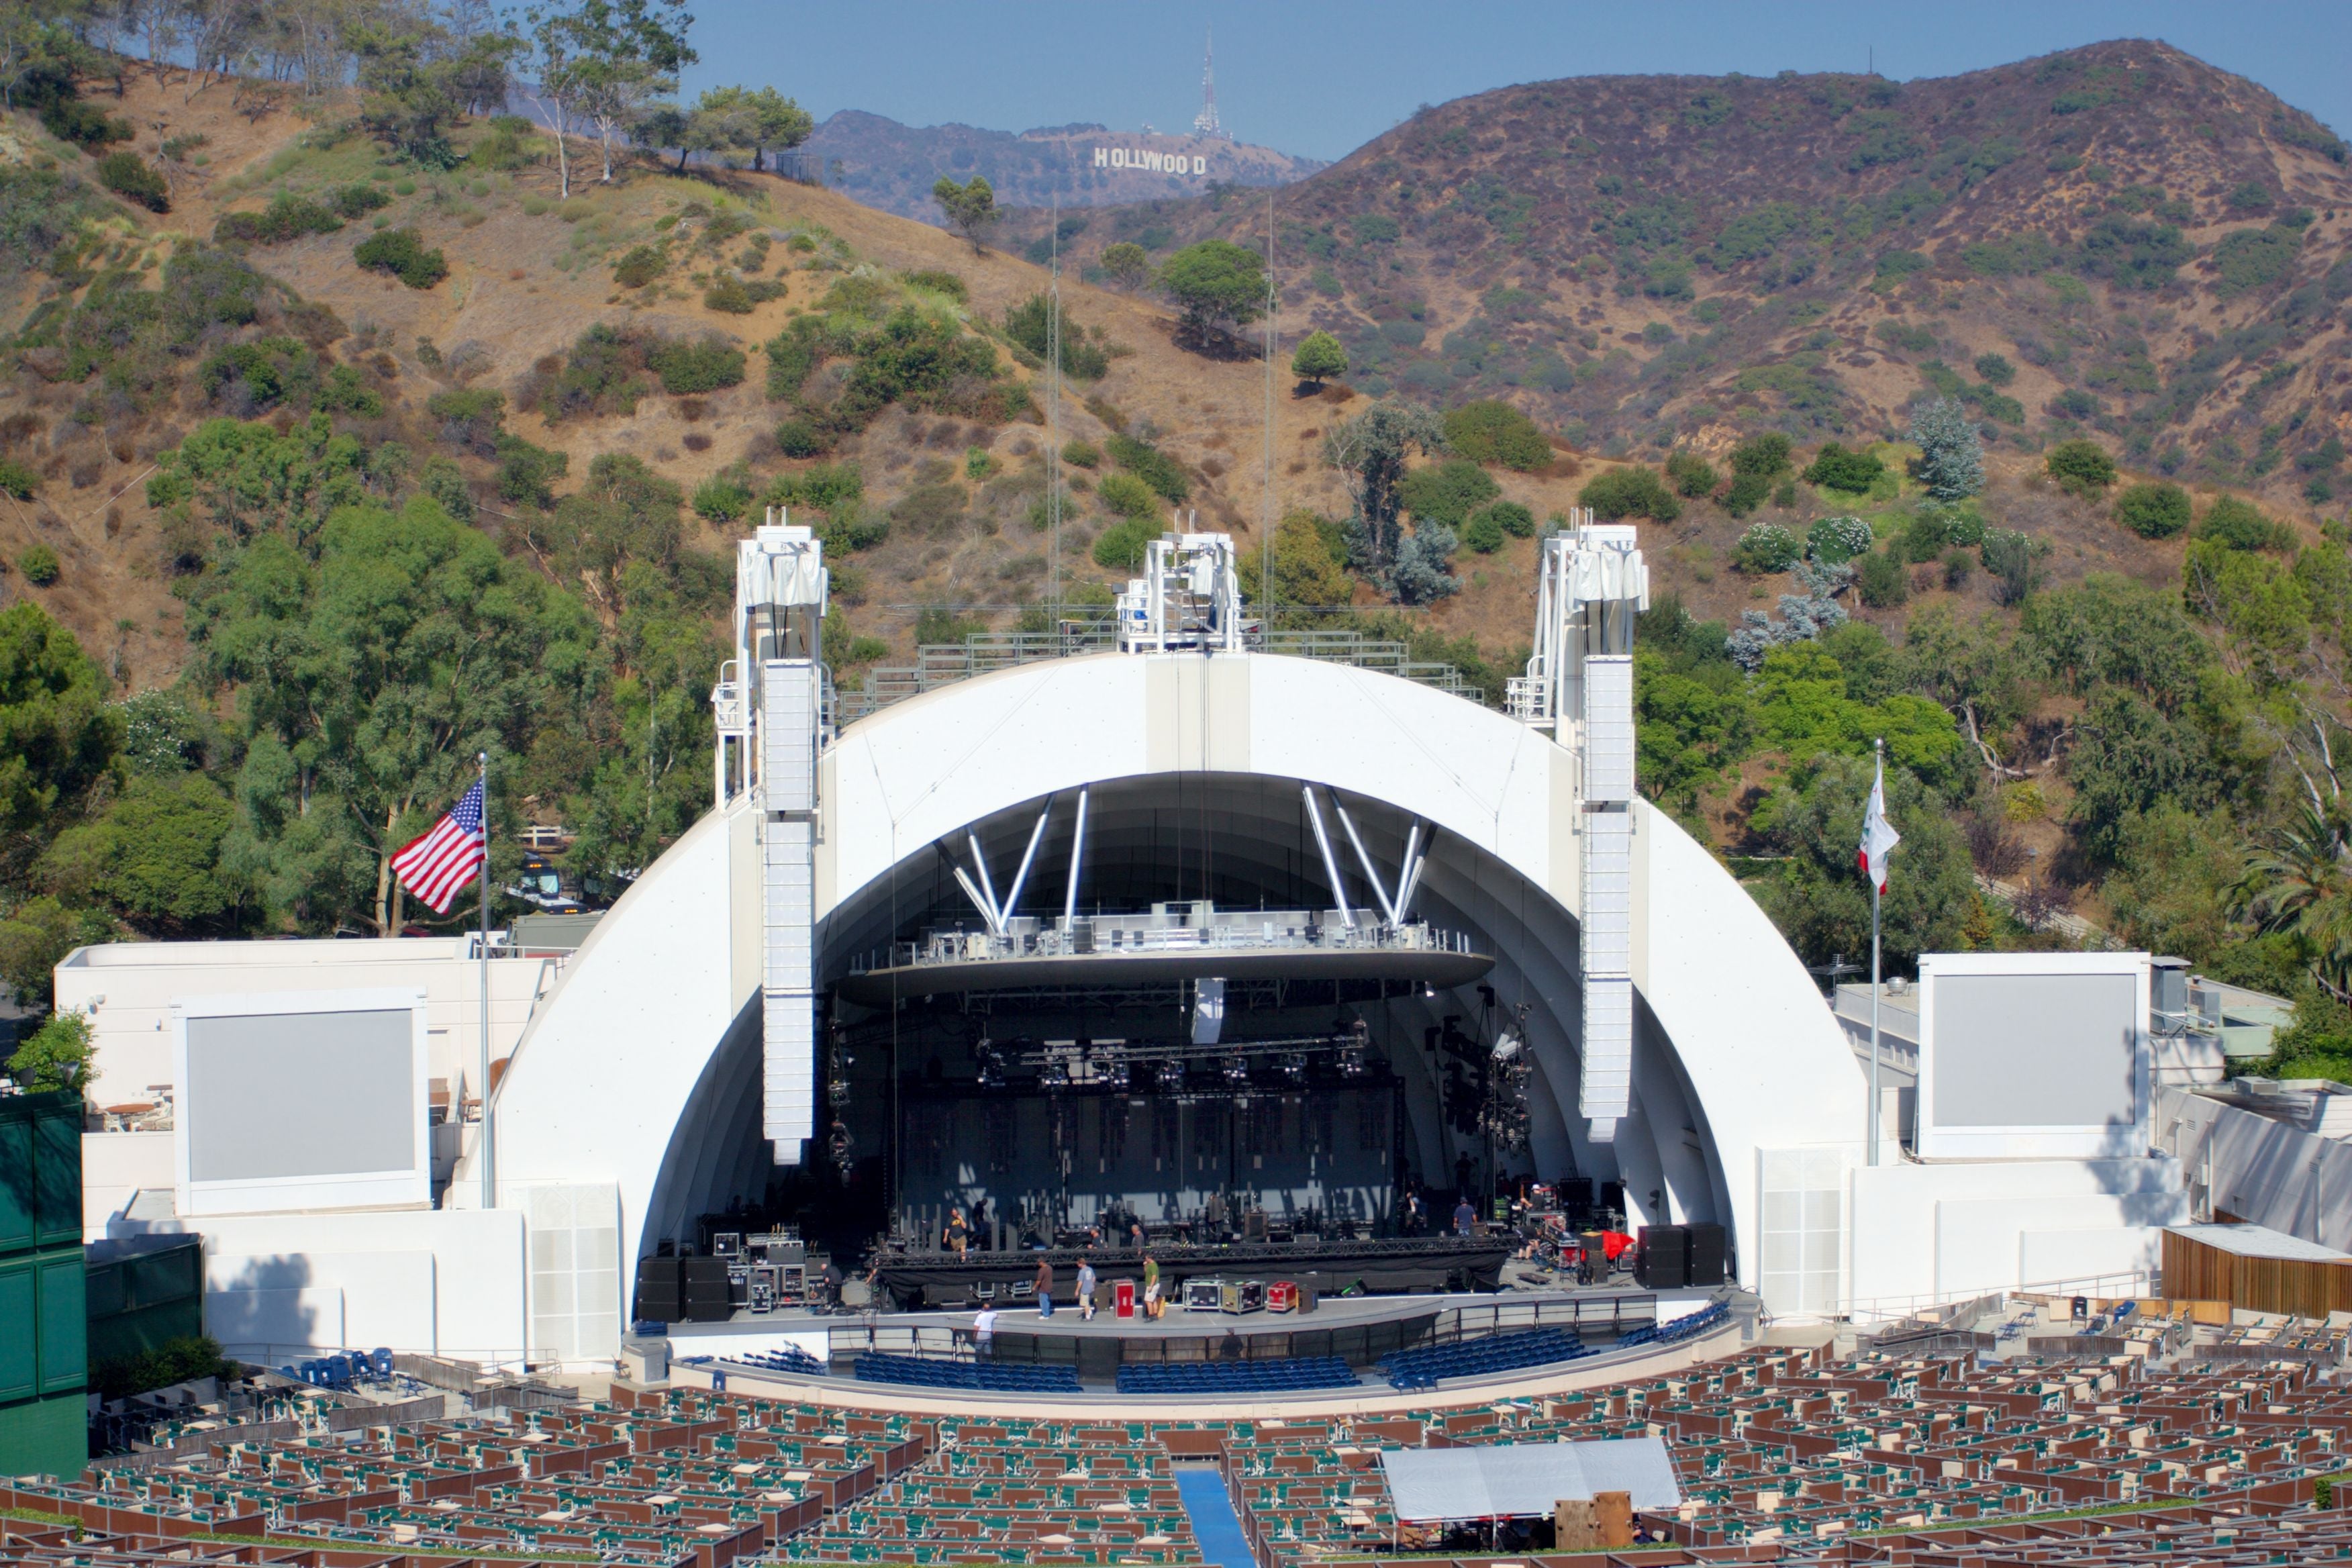 Hollywood Bowl - Hollywood | Tickets, Schedule, Seating ...